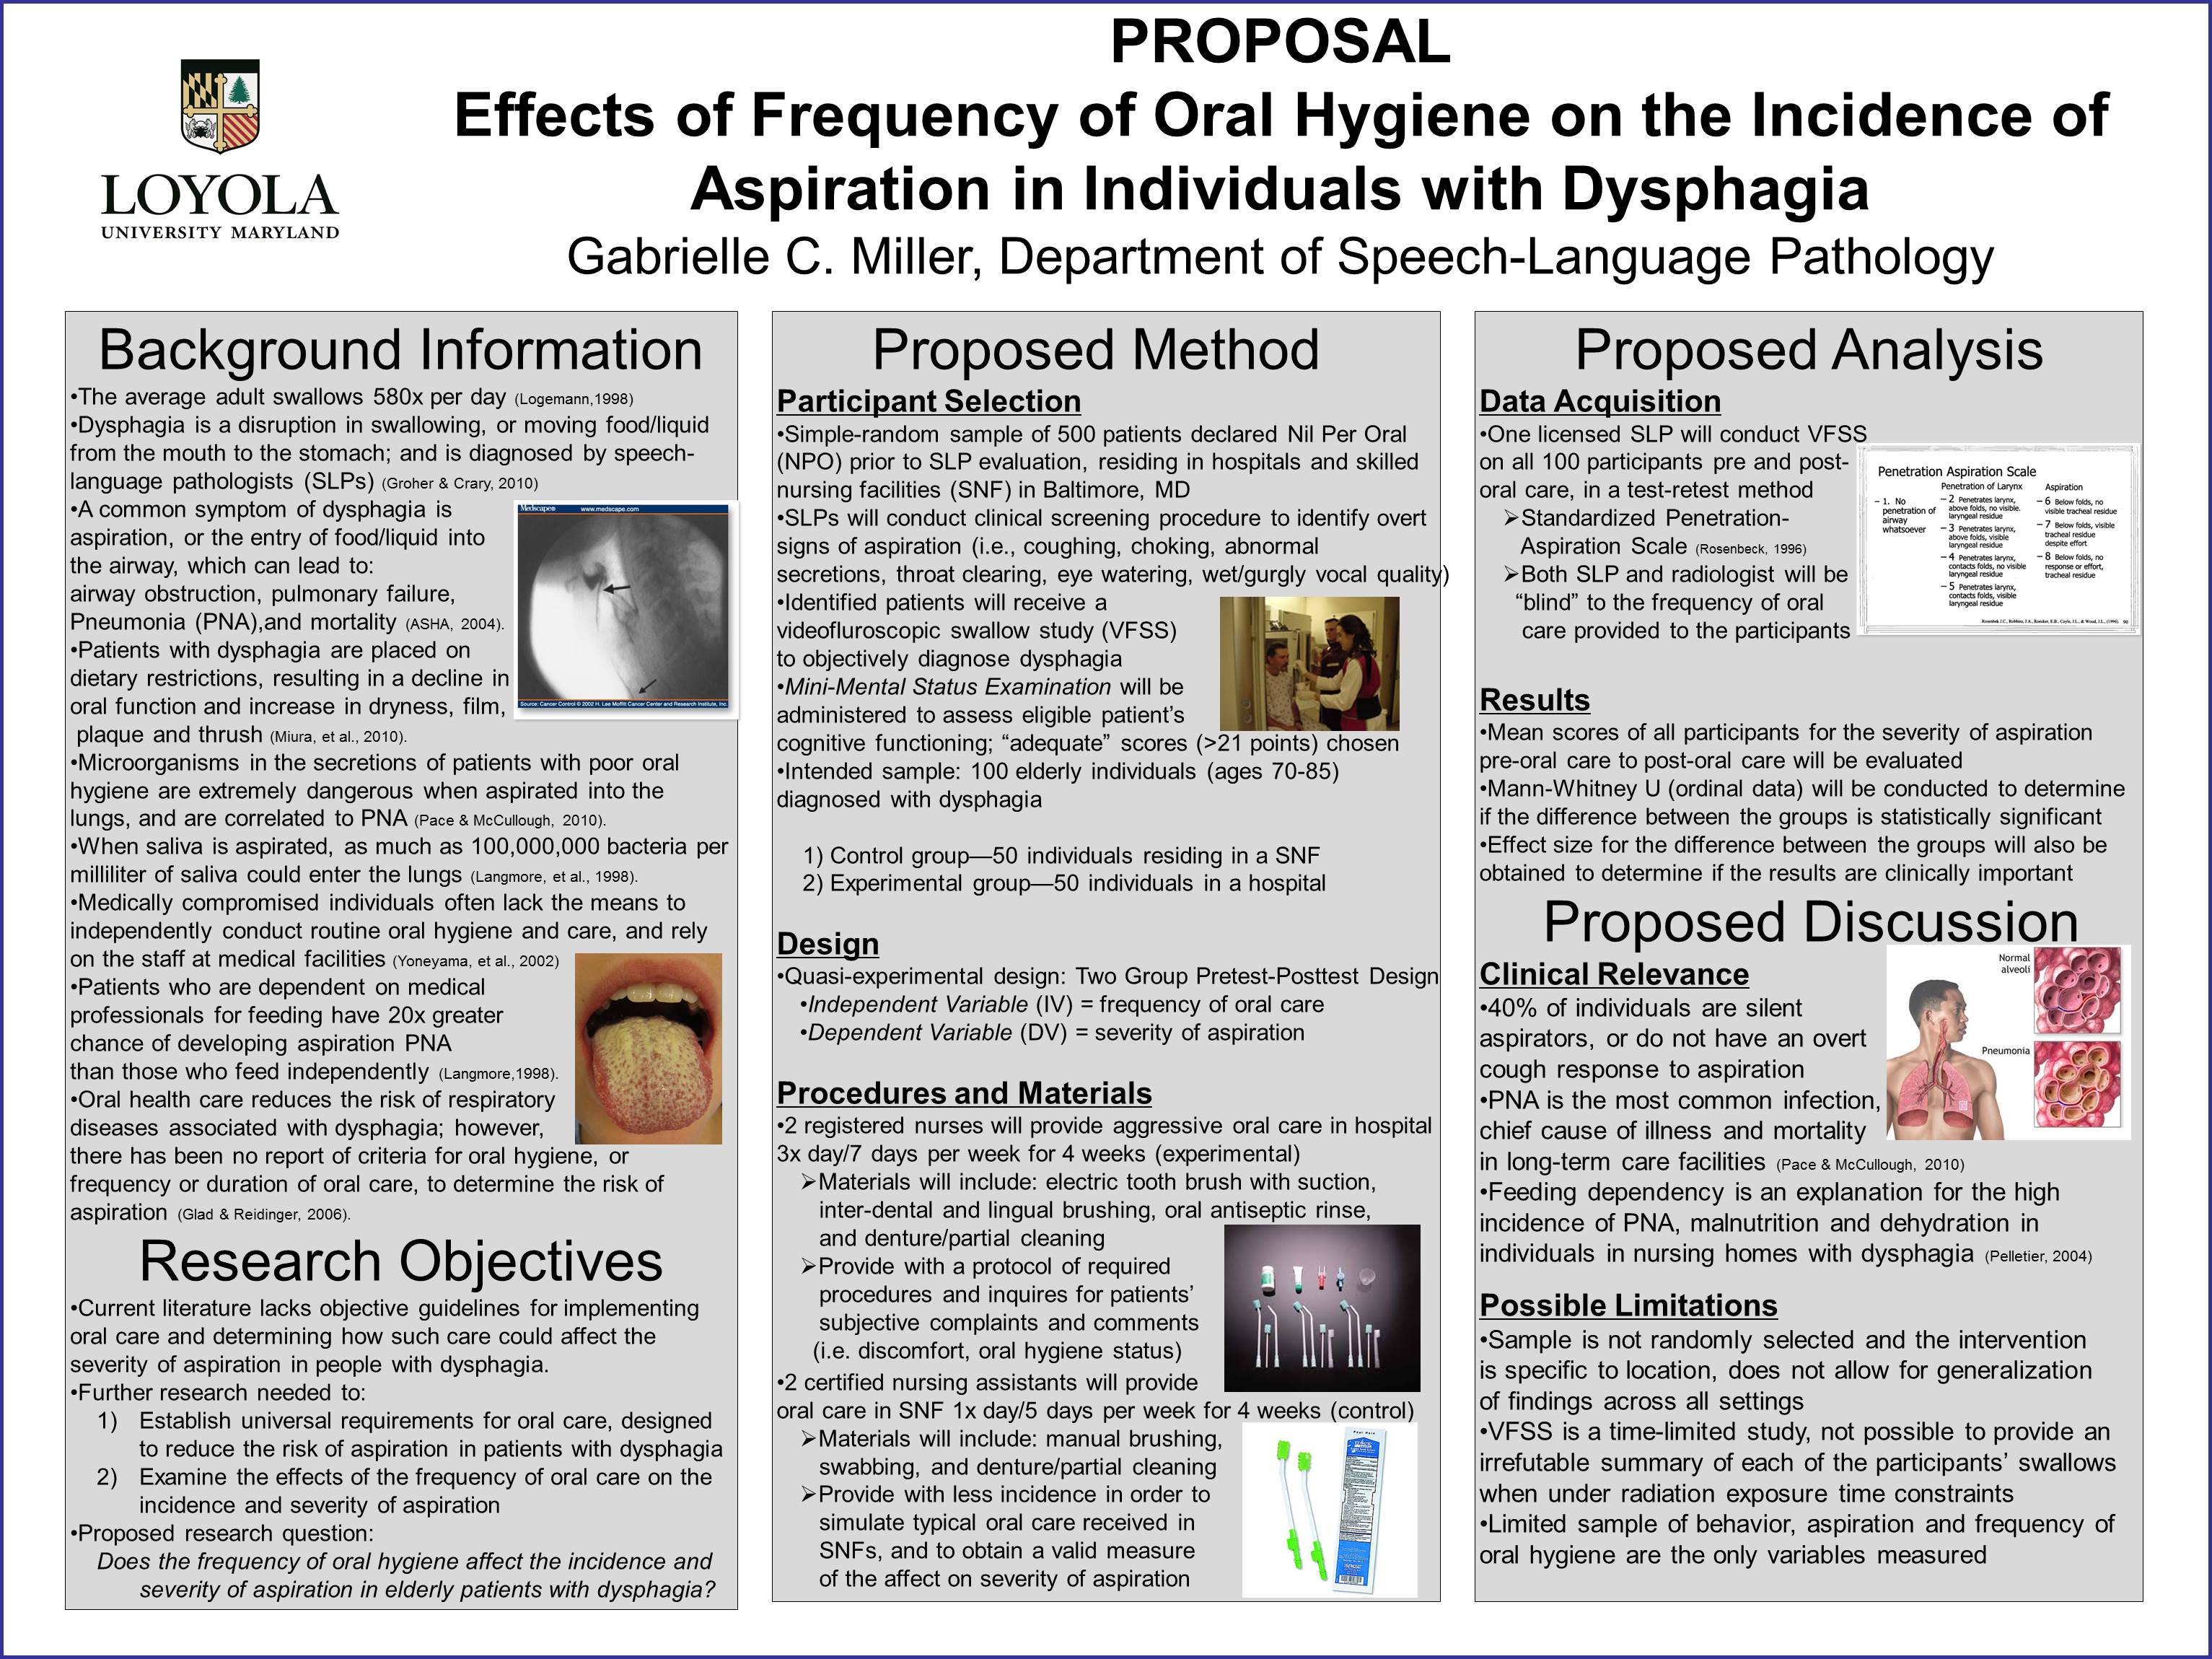 Enlarged poster image: Effects of Frequency of Oral Hygiene on the Incidence of Aspiration in Individuals with Dysphagia